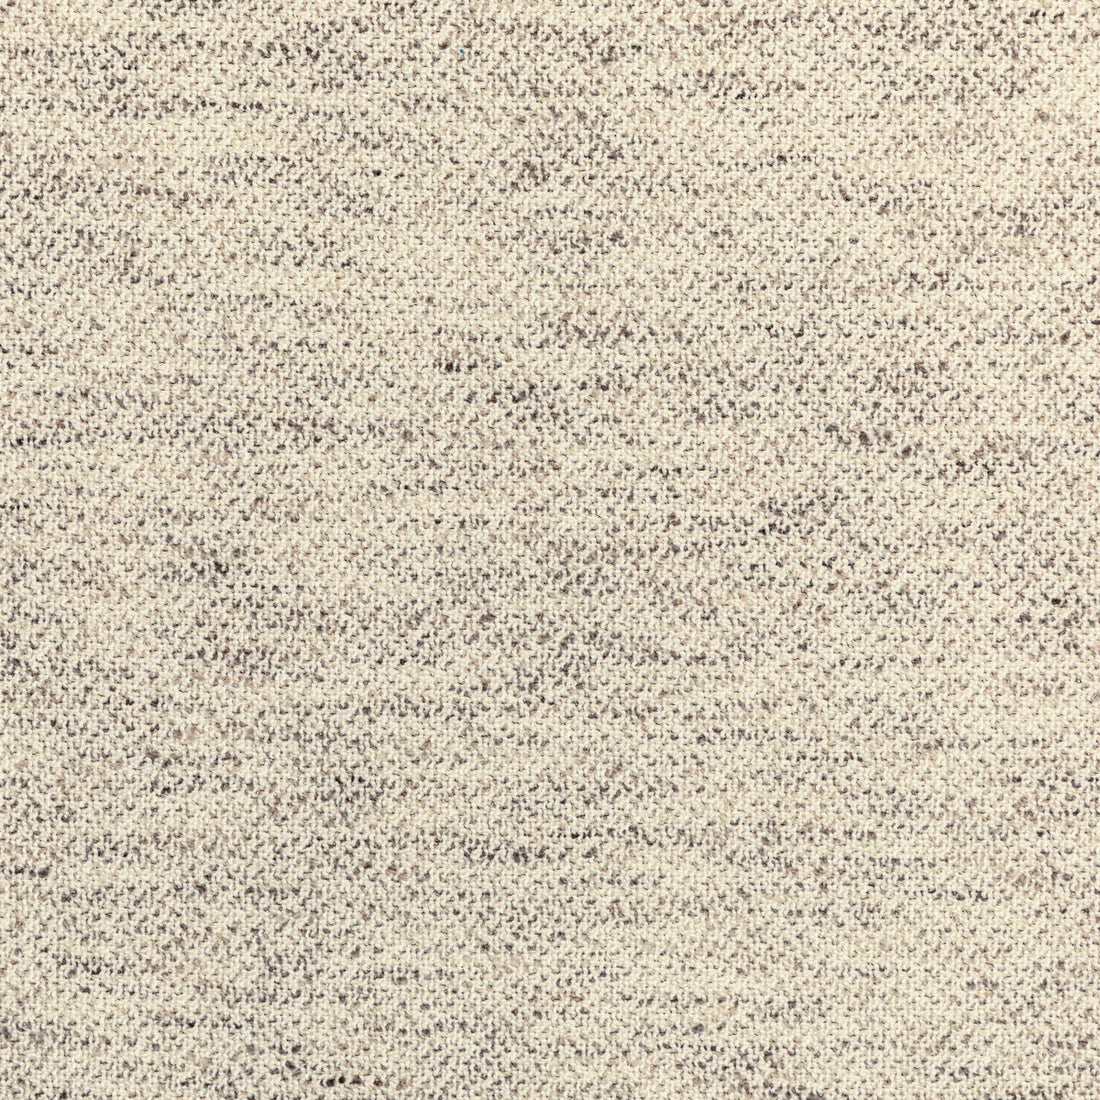 Fashion House fabric in gold sand color - pattern 36108.116.0 - by Kravet Couture in the Luxury Textures II collection